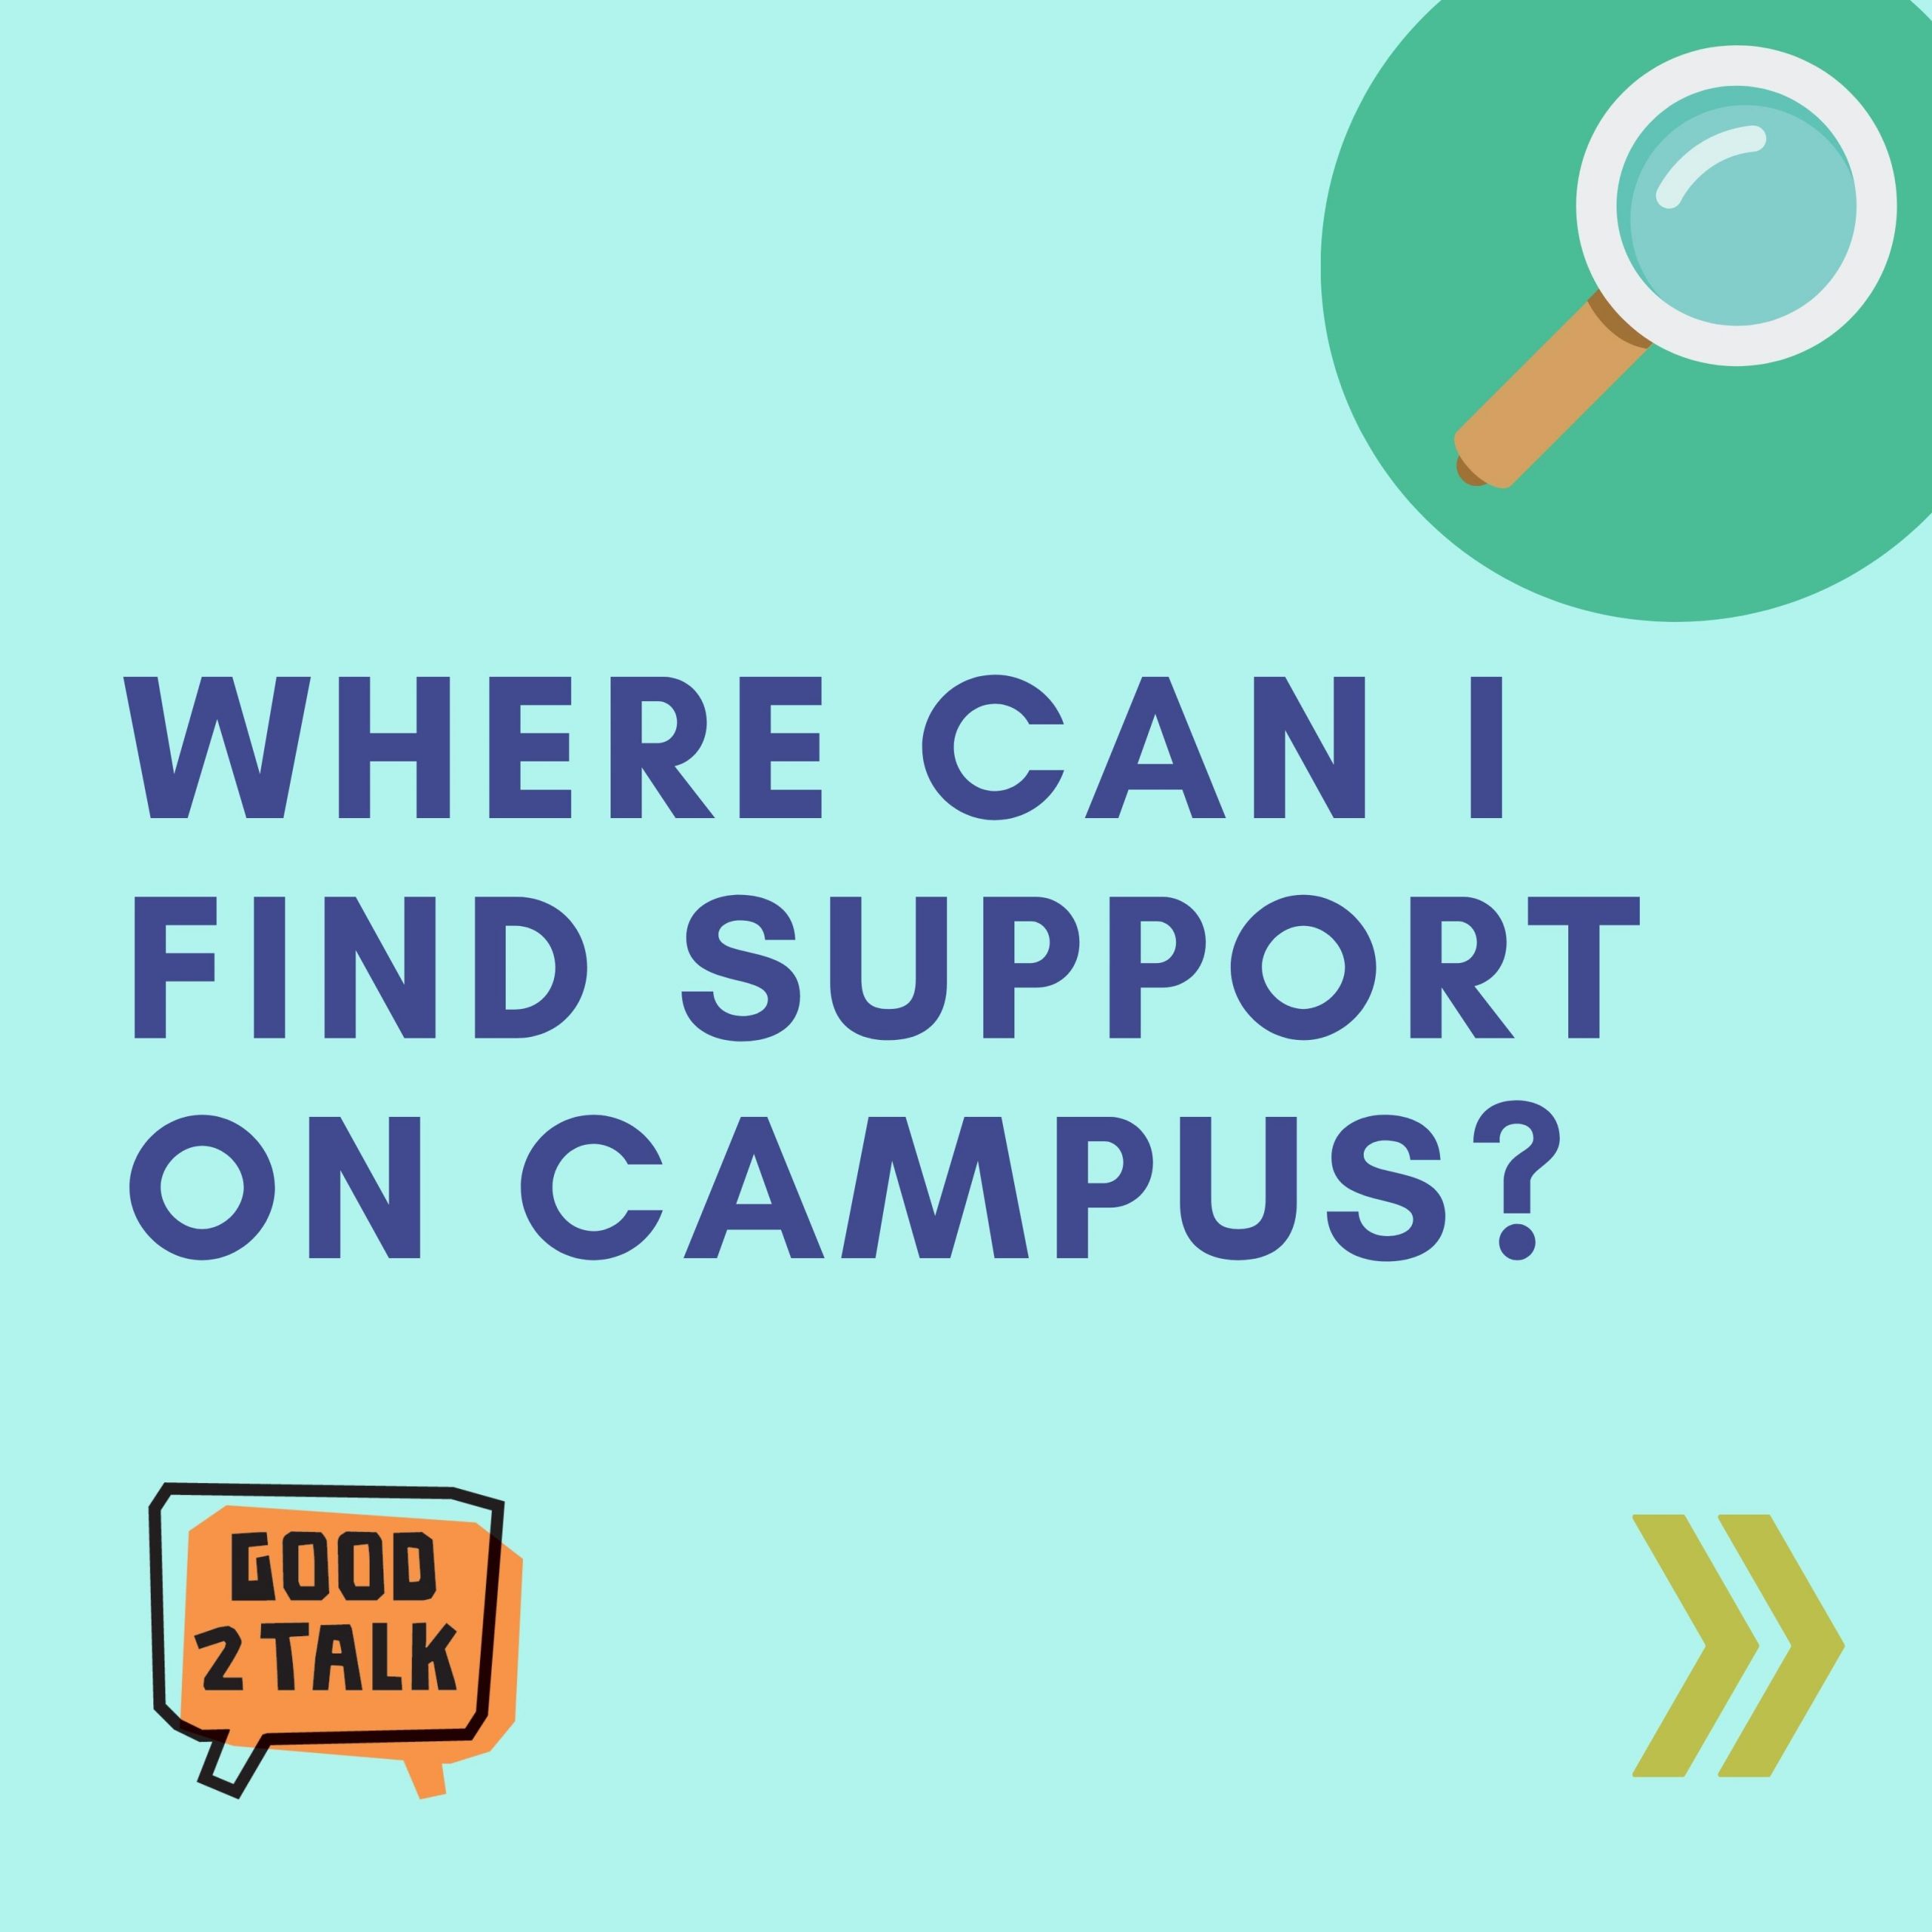 Where can I find support on Campus?